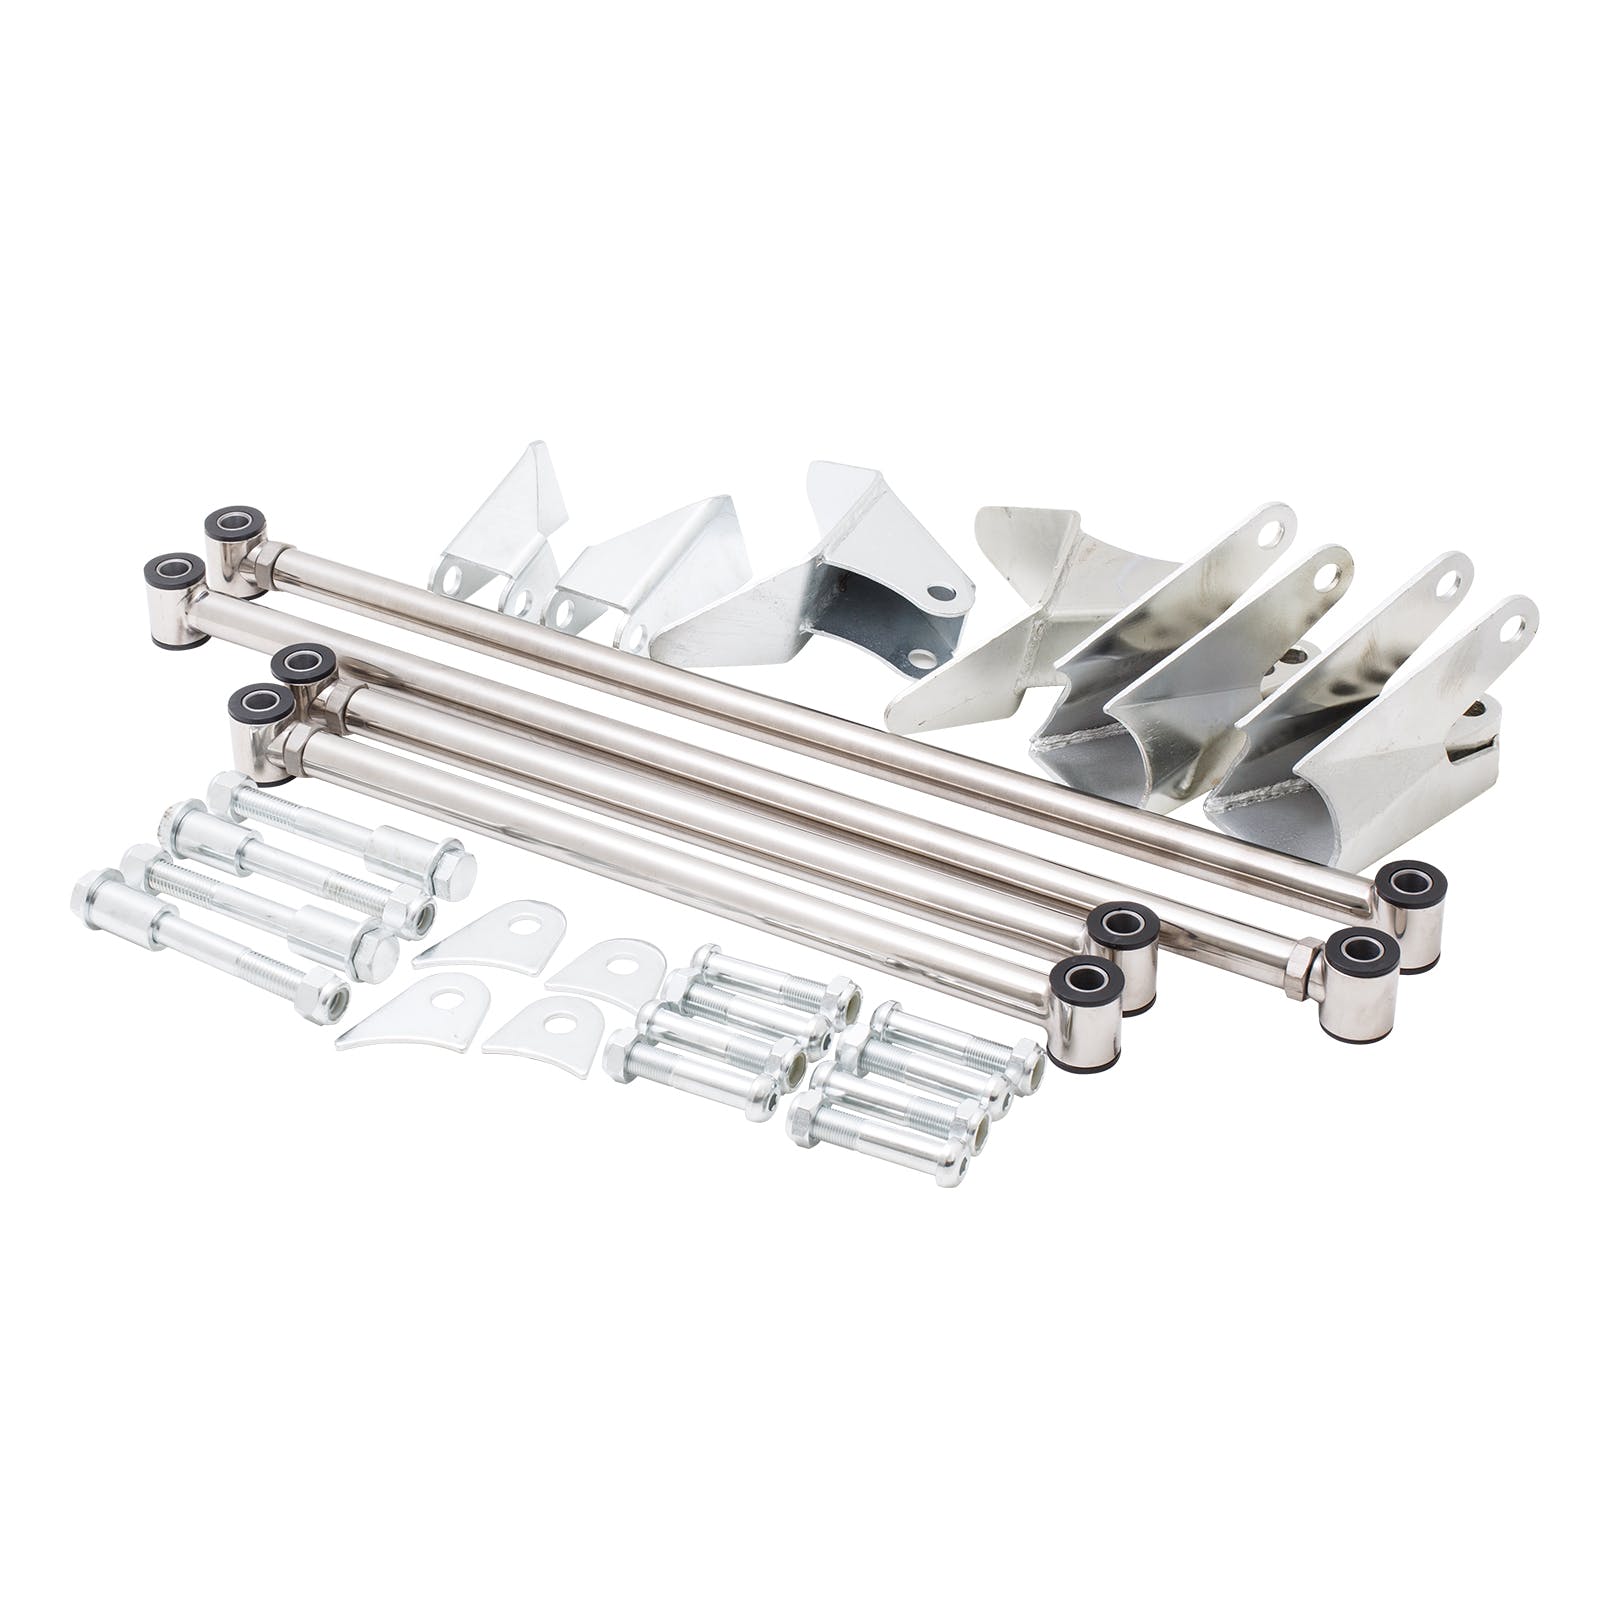 Top Street Performance CB5102 1933 Ford Triangulated 4-Link Rear-End Kit, Stainless Steel